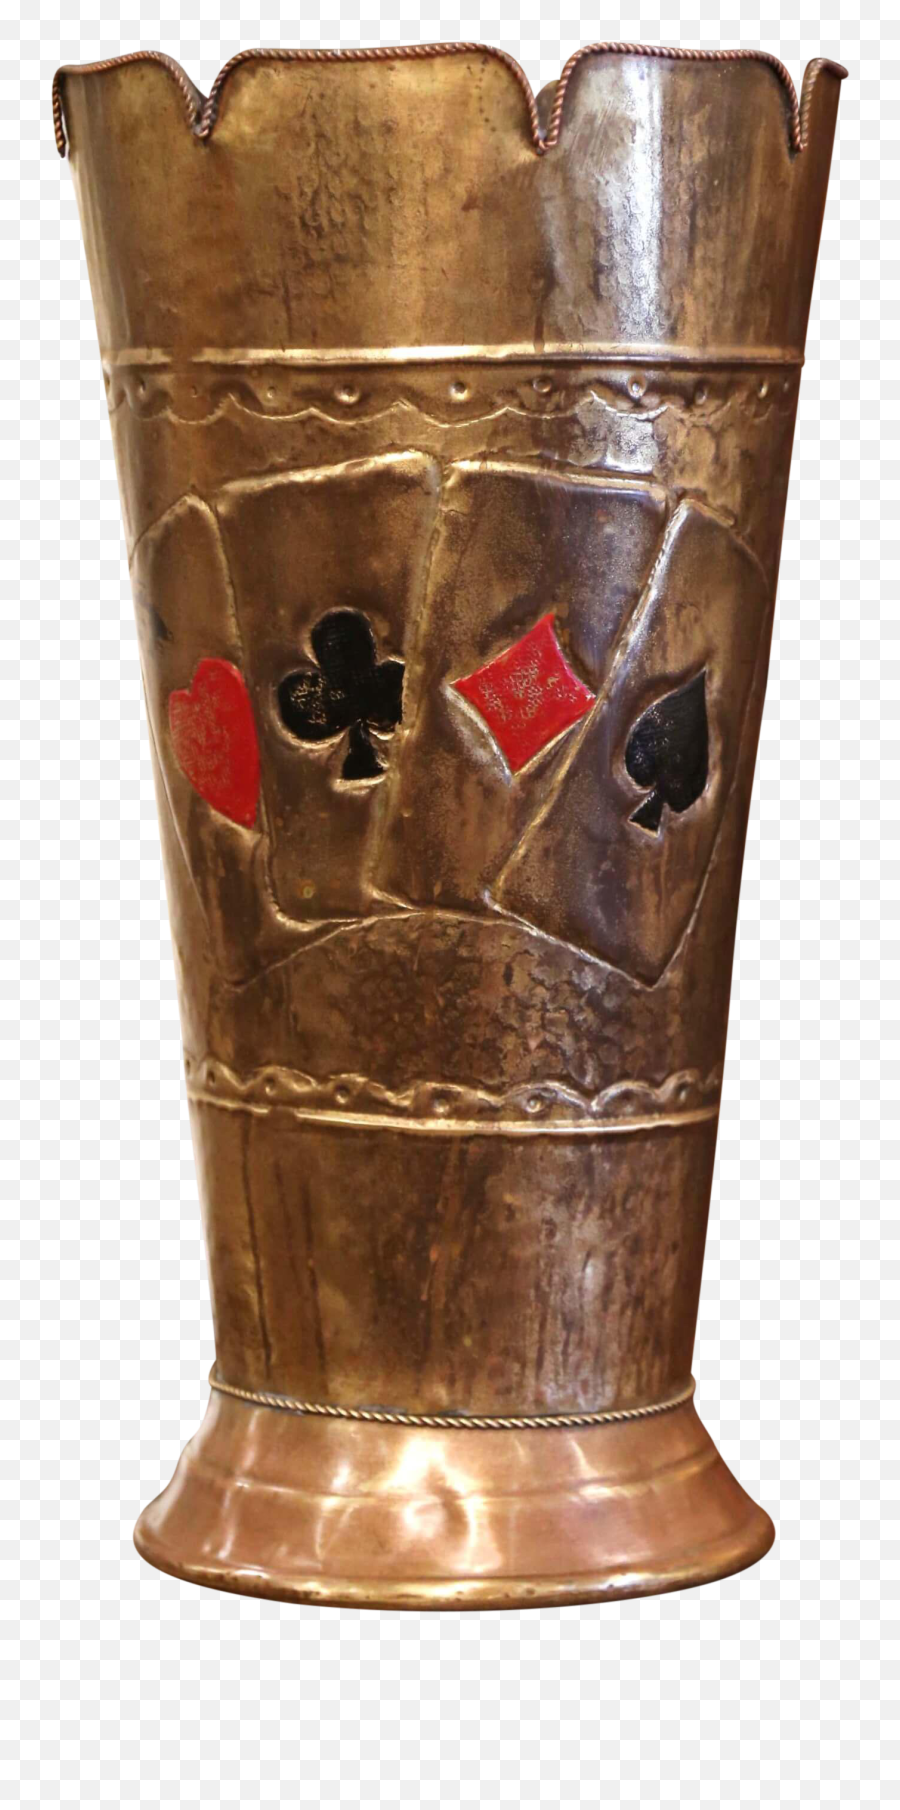 Early 20th Century French Brass Umbrella Stand With Playing Card Symbols Emoji,Card Emoticons